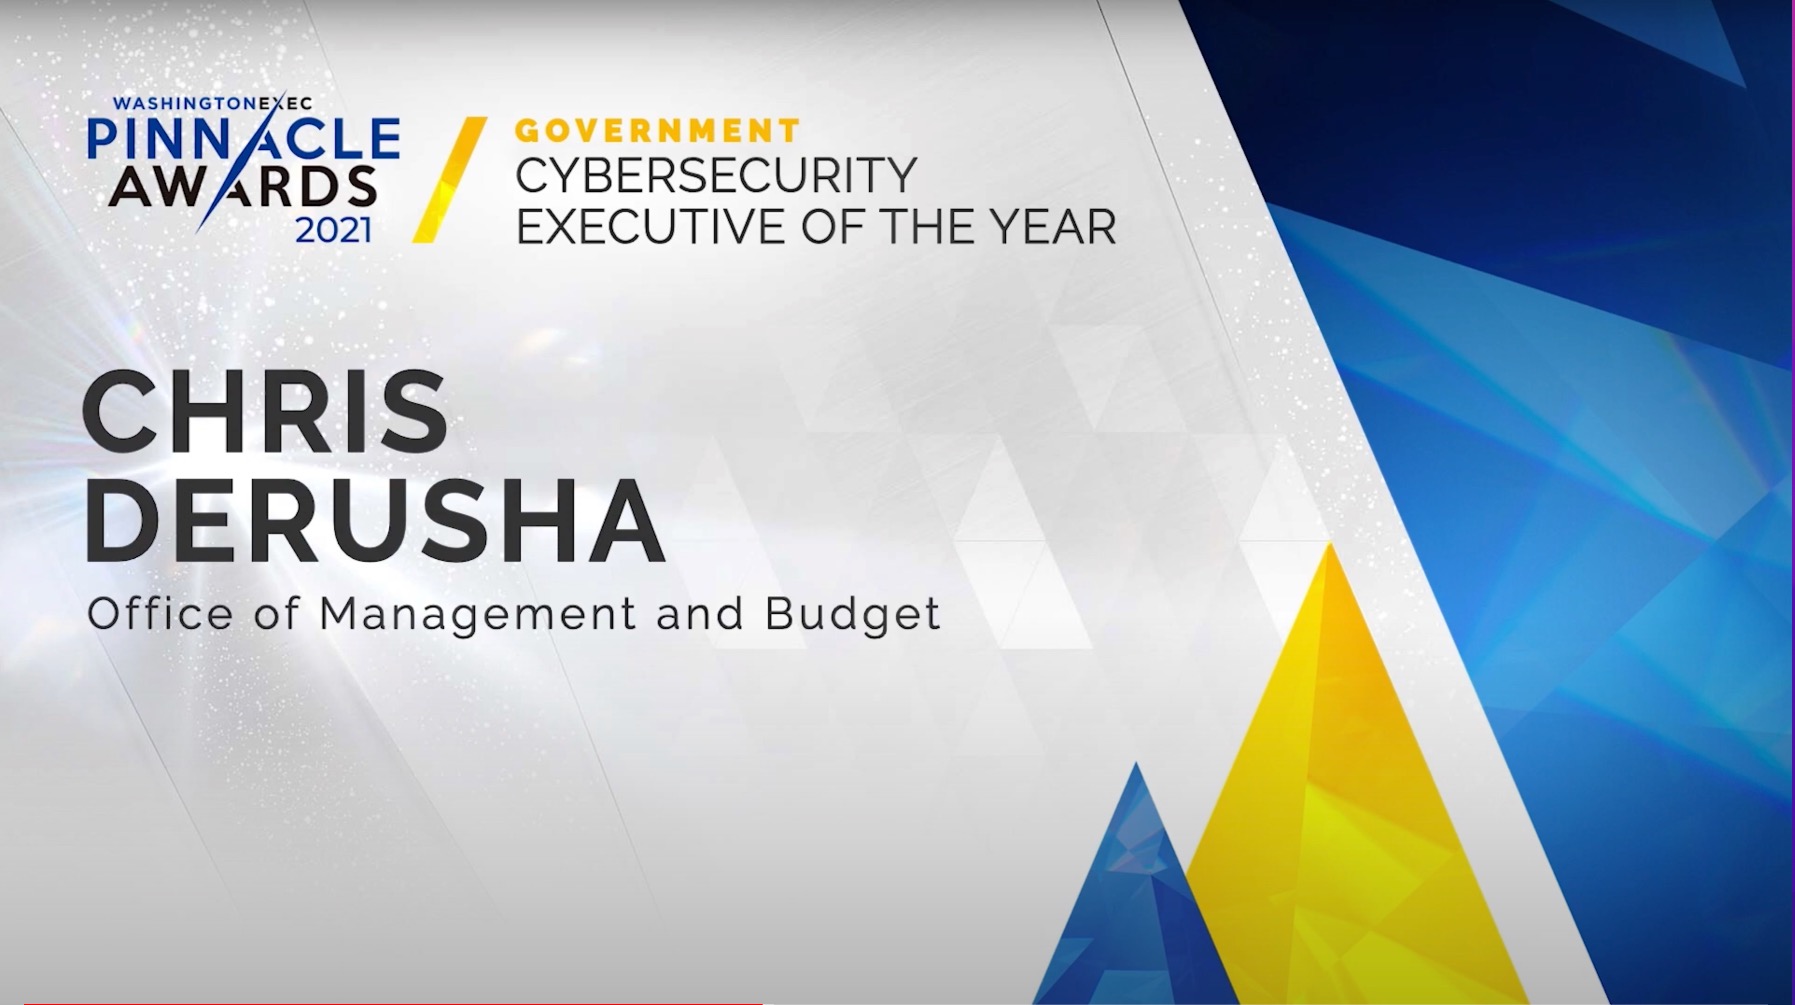 Cybersecurity - Congratulations to Chris DeRusha from the Office of Management and Budget on winning the award for Cybersecurity Executive of the Year in the Government Sector